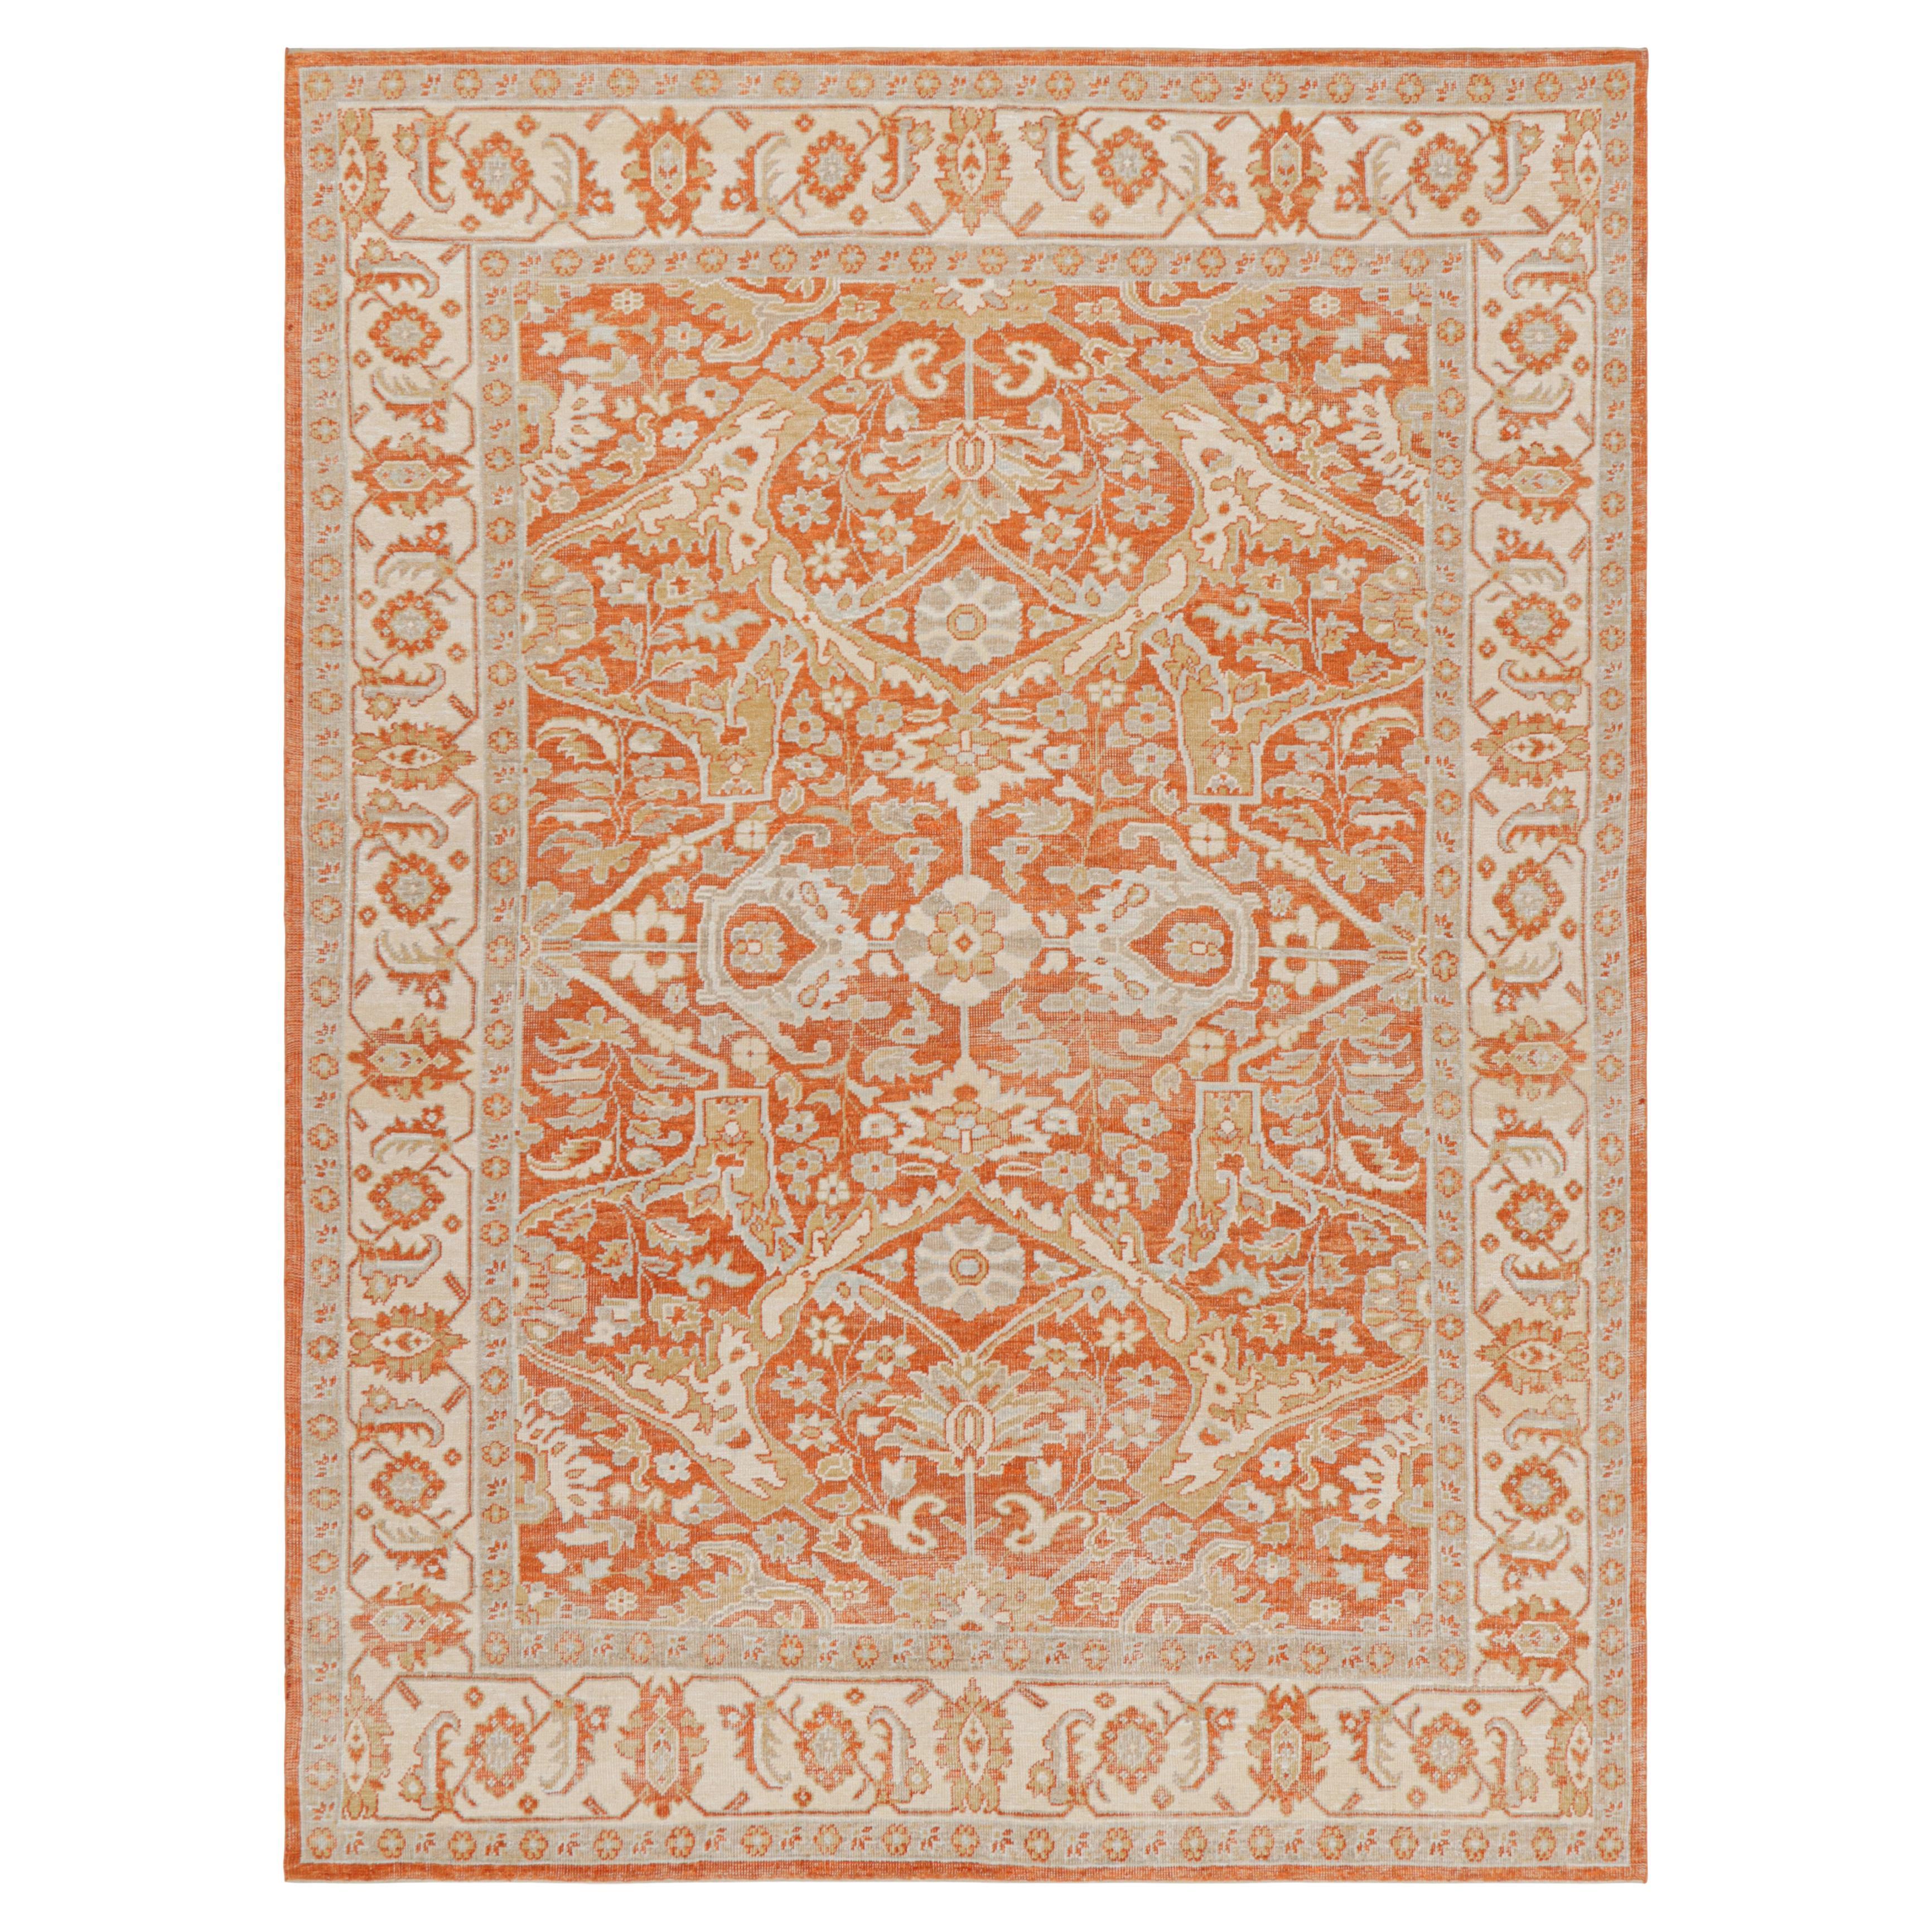 Rug & Kilim’s Oushak Style Rug in Orange with Floral Patterns in Beige and Gold For Sale